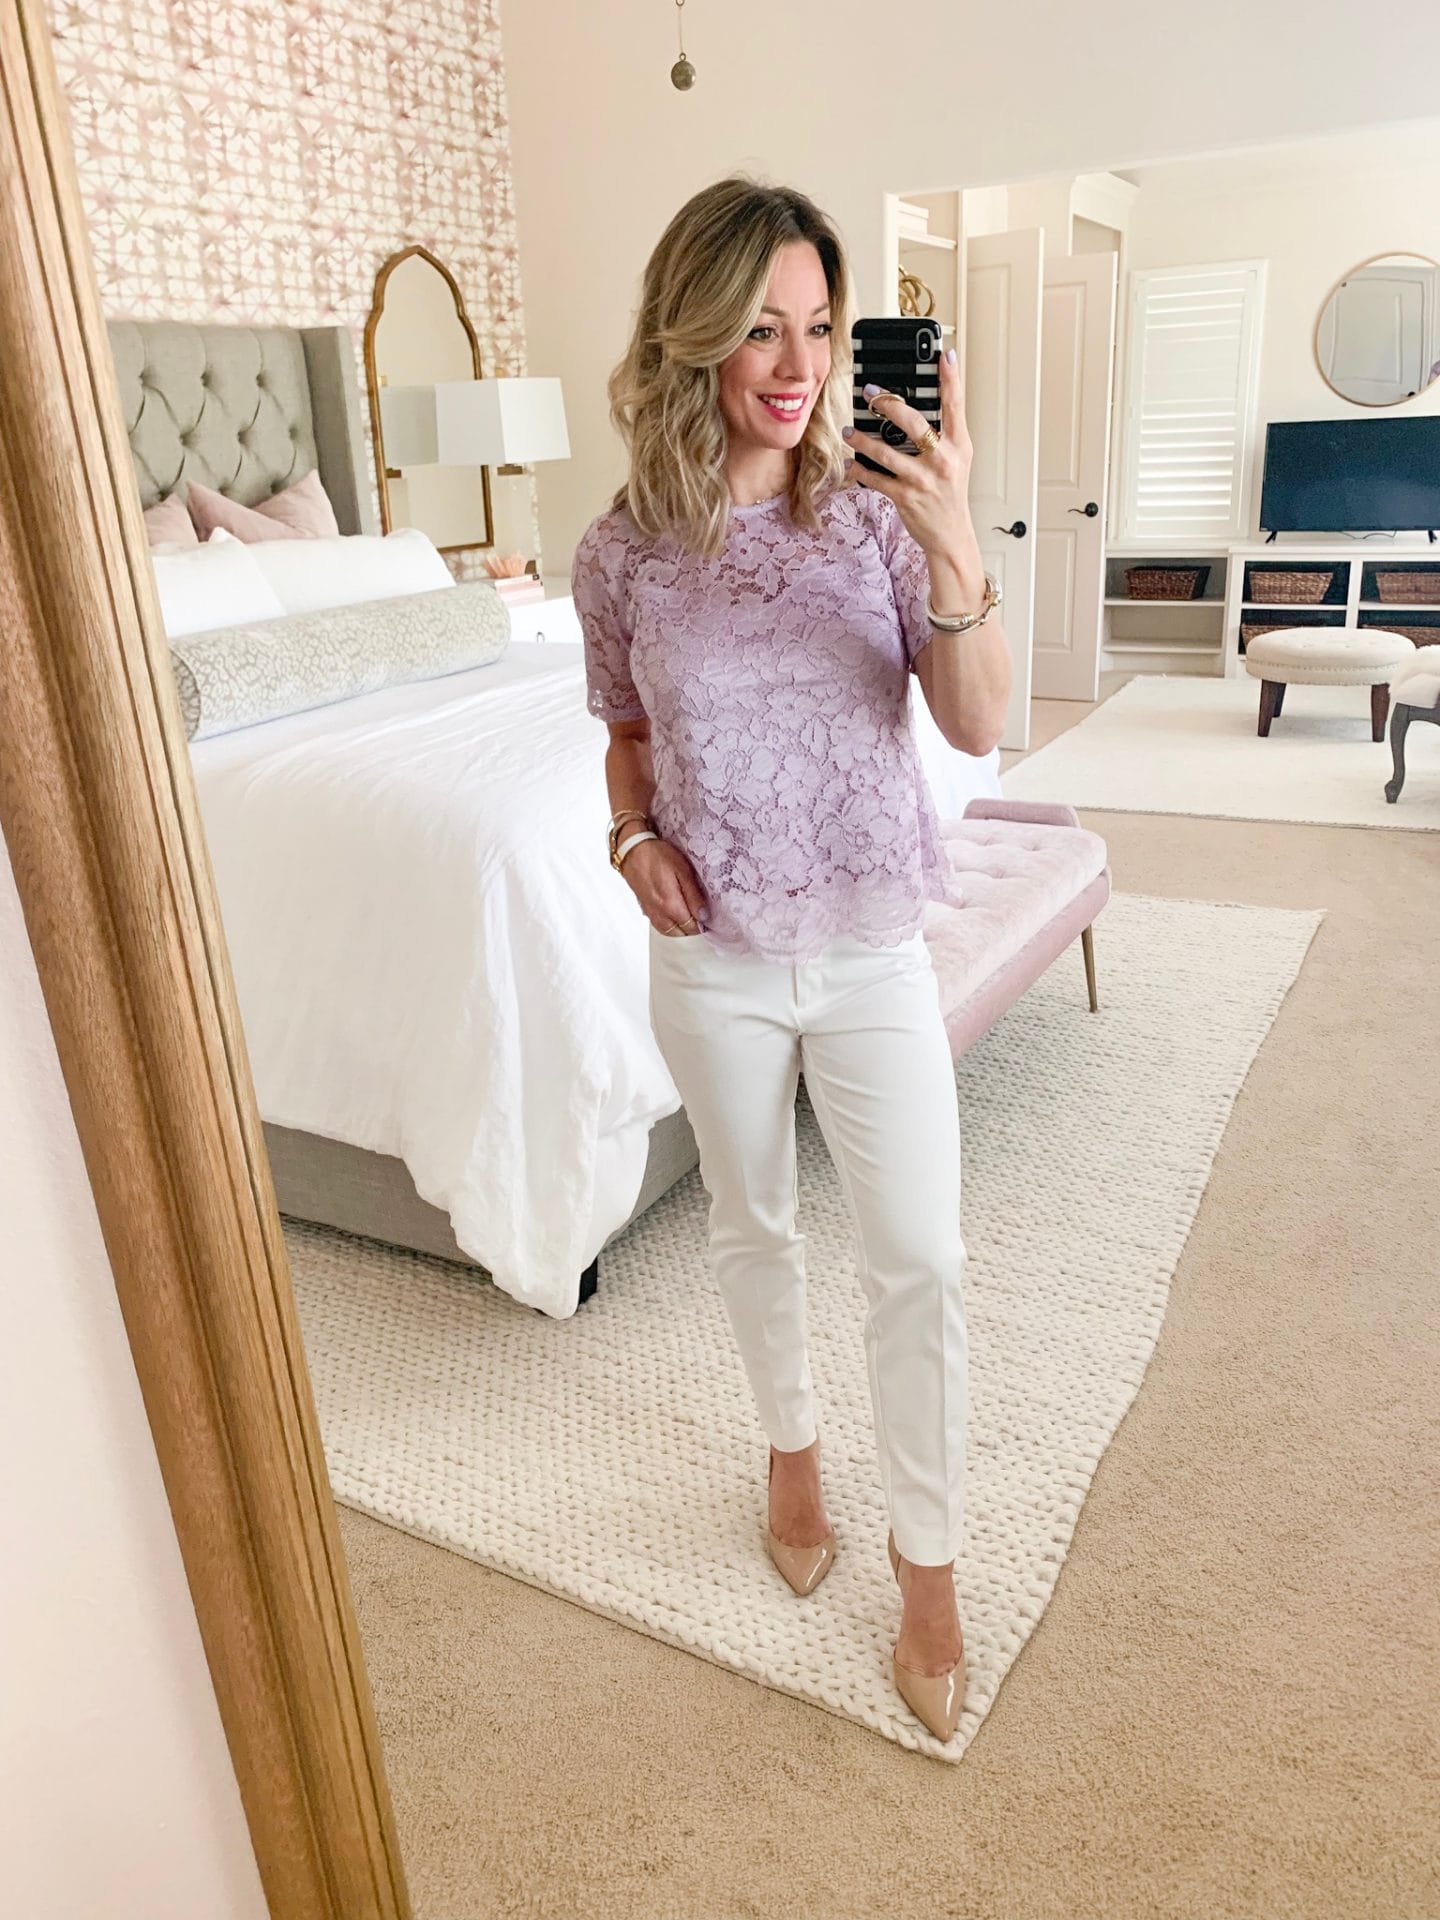 White pants and lavender lace top